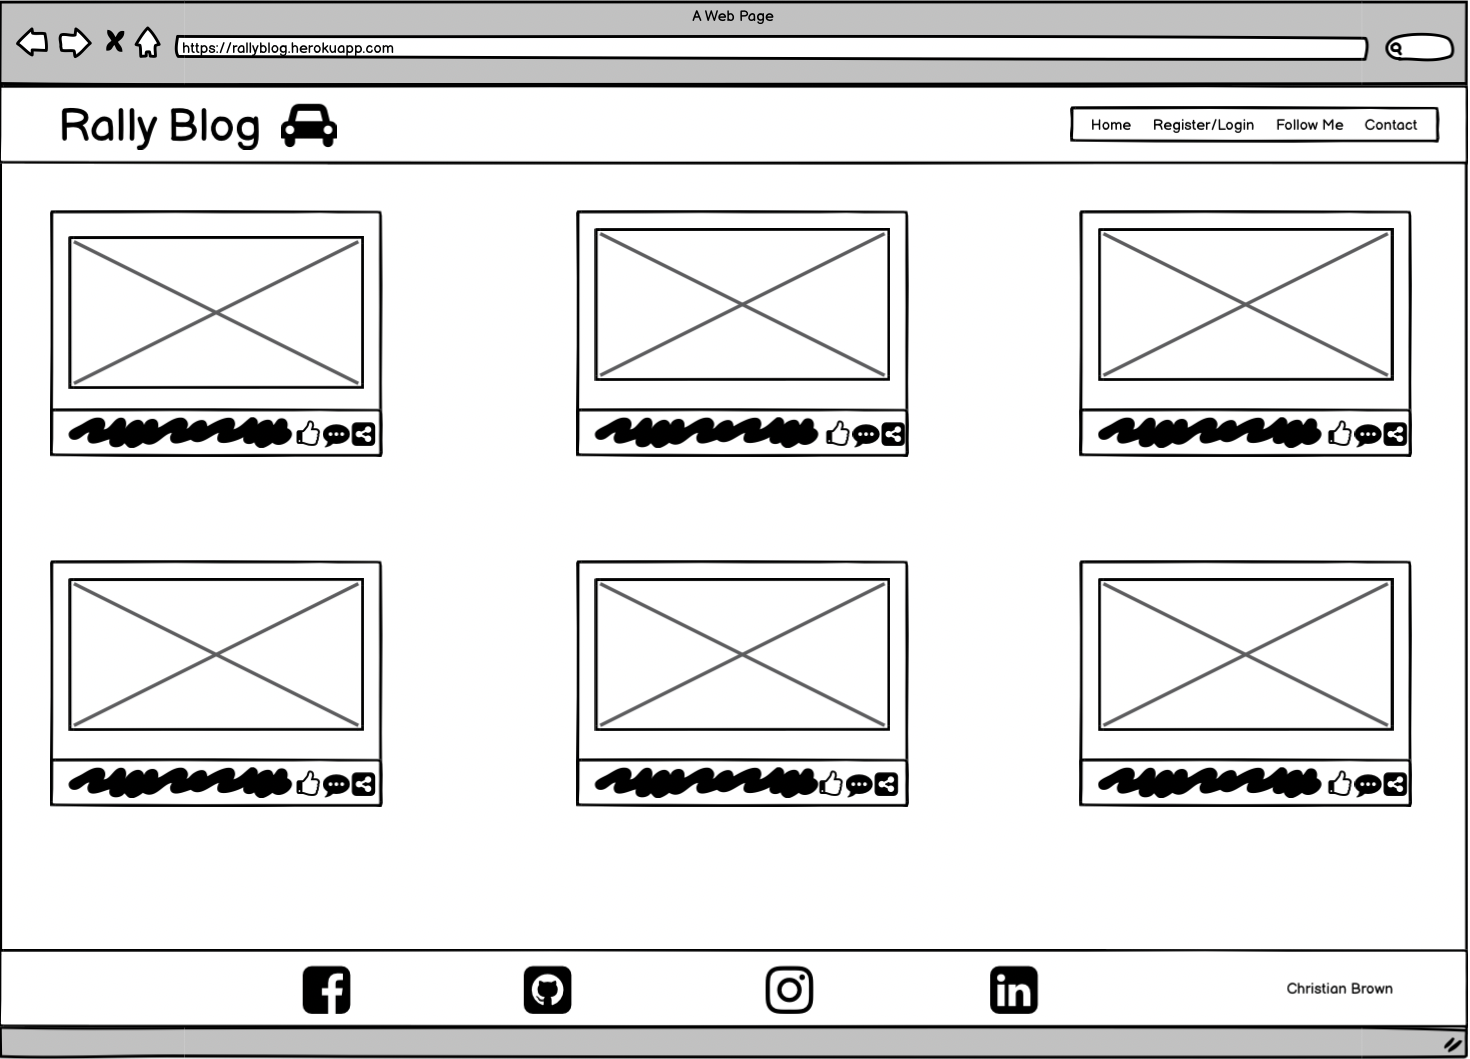 Home Page Wireframe